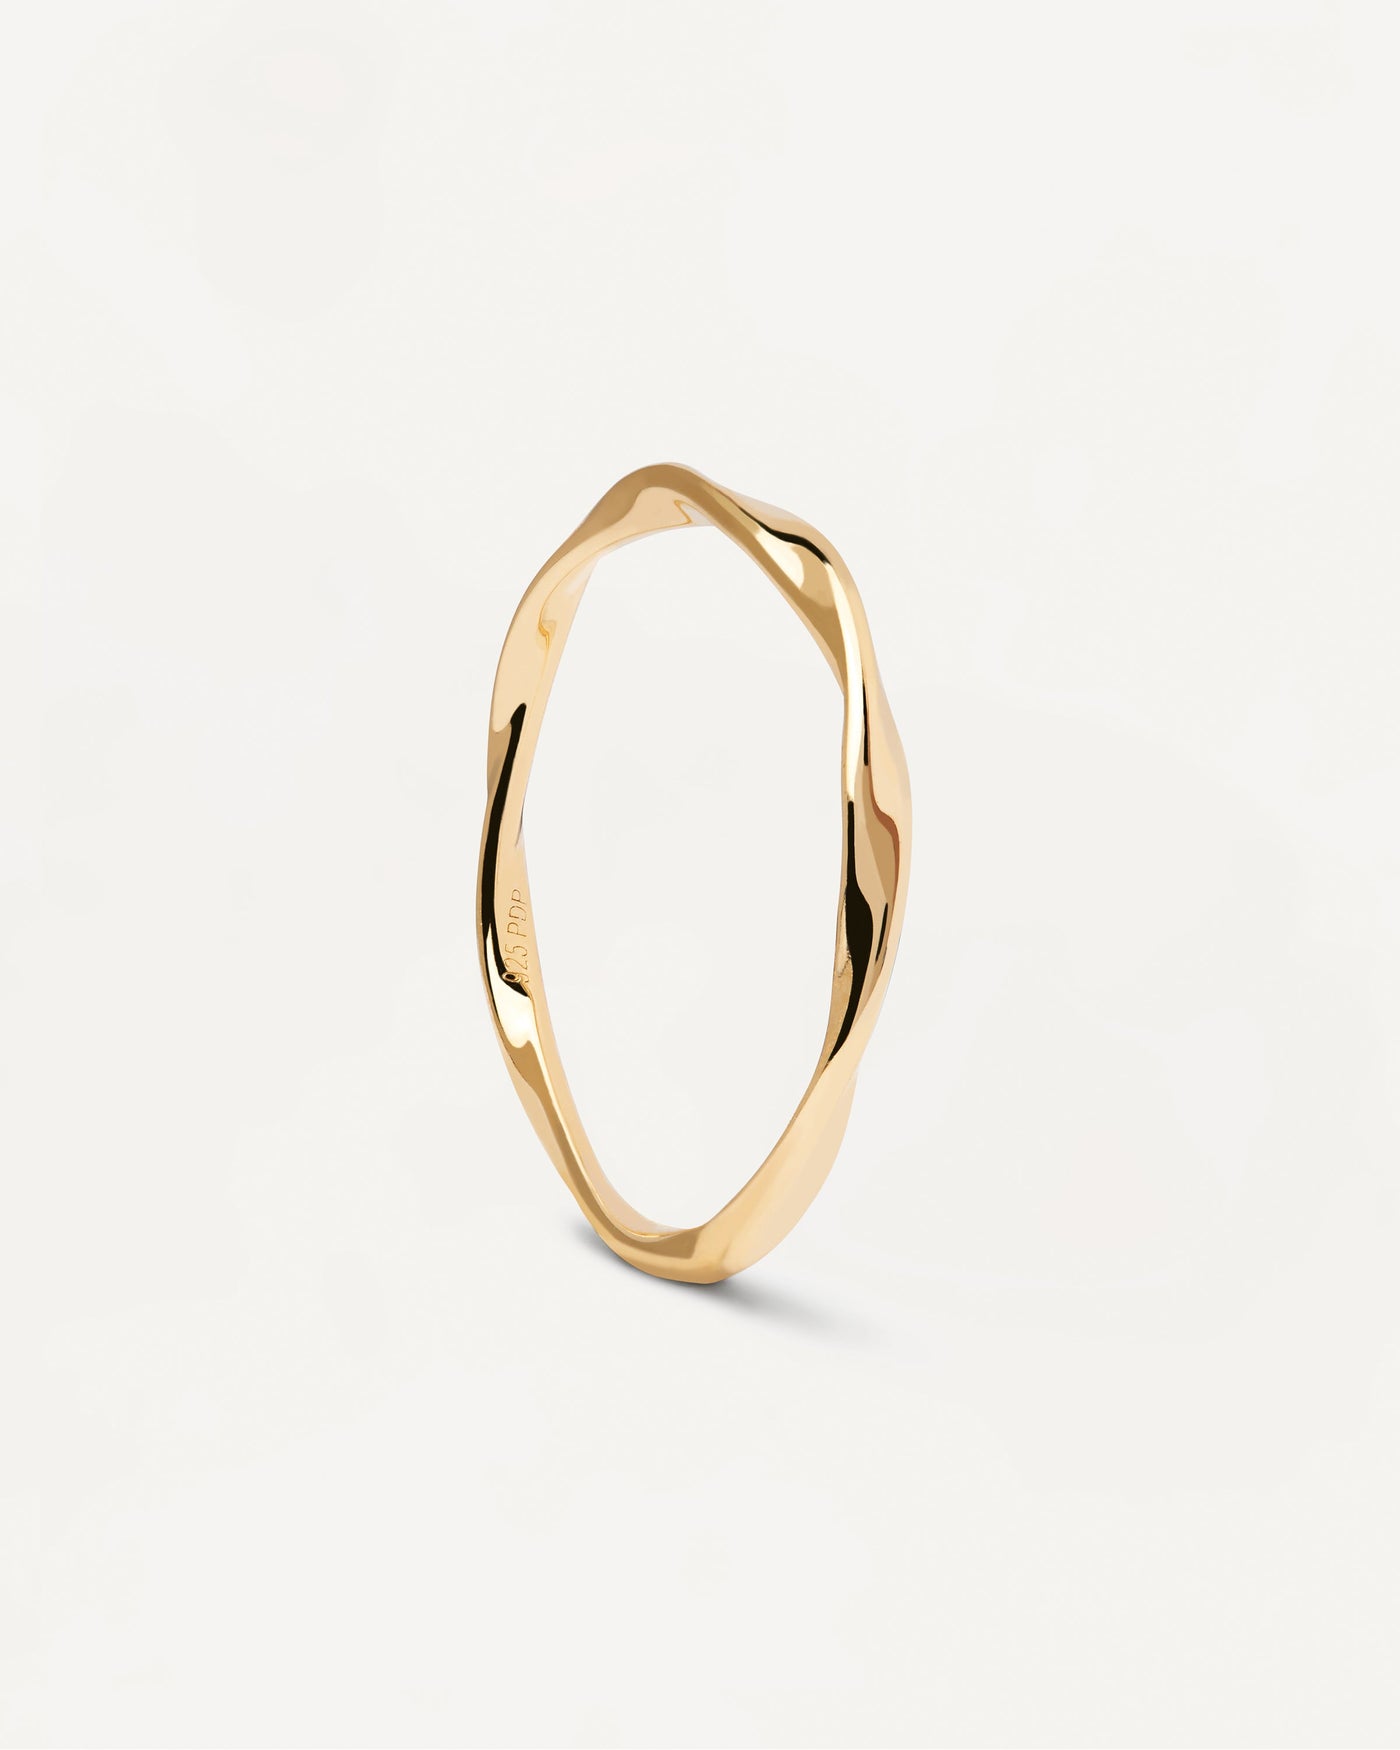 2023 Selection | Spiral Ring. Twisted ring in gold-plated sterling silver. Get the latest arrival from PDPAOLA. Place your order safely and get this Best Seller. Free Shipping.